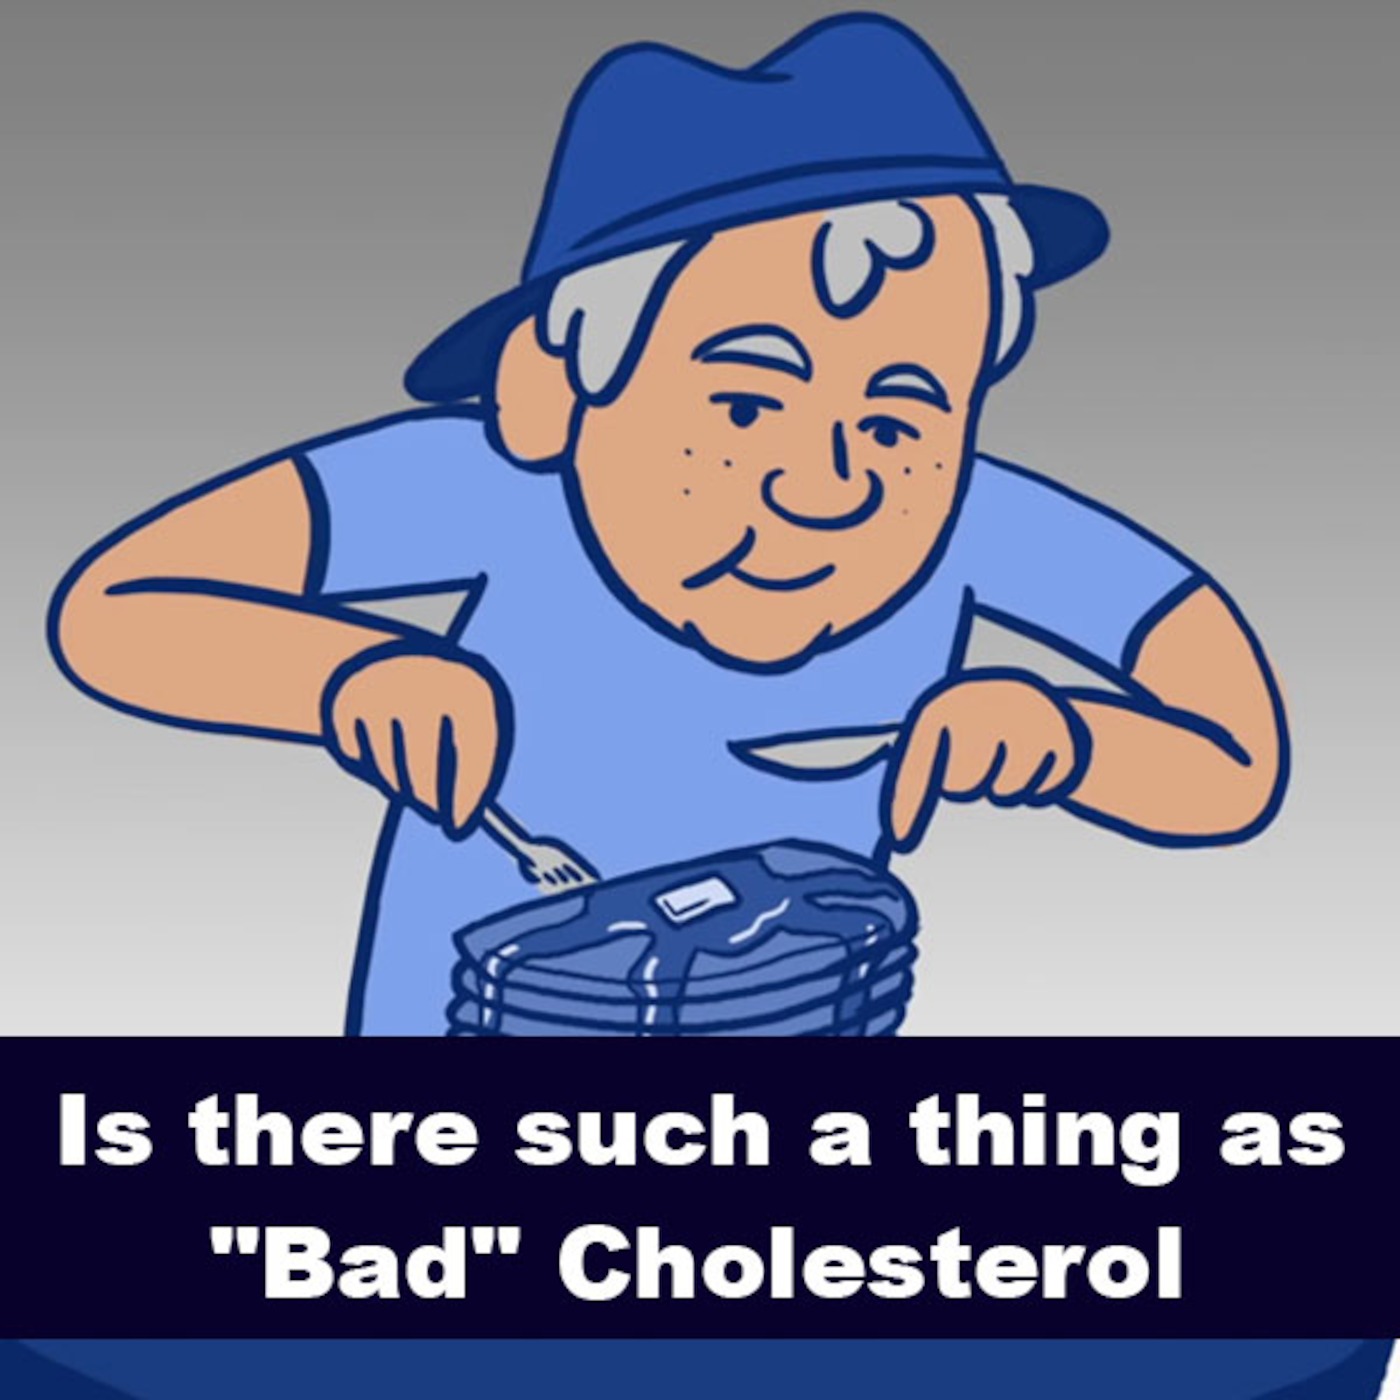 Is there such a thing as "Bad" Cholesterol?